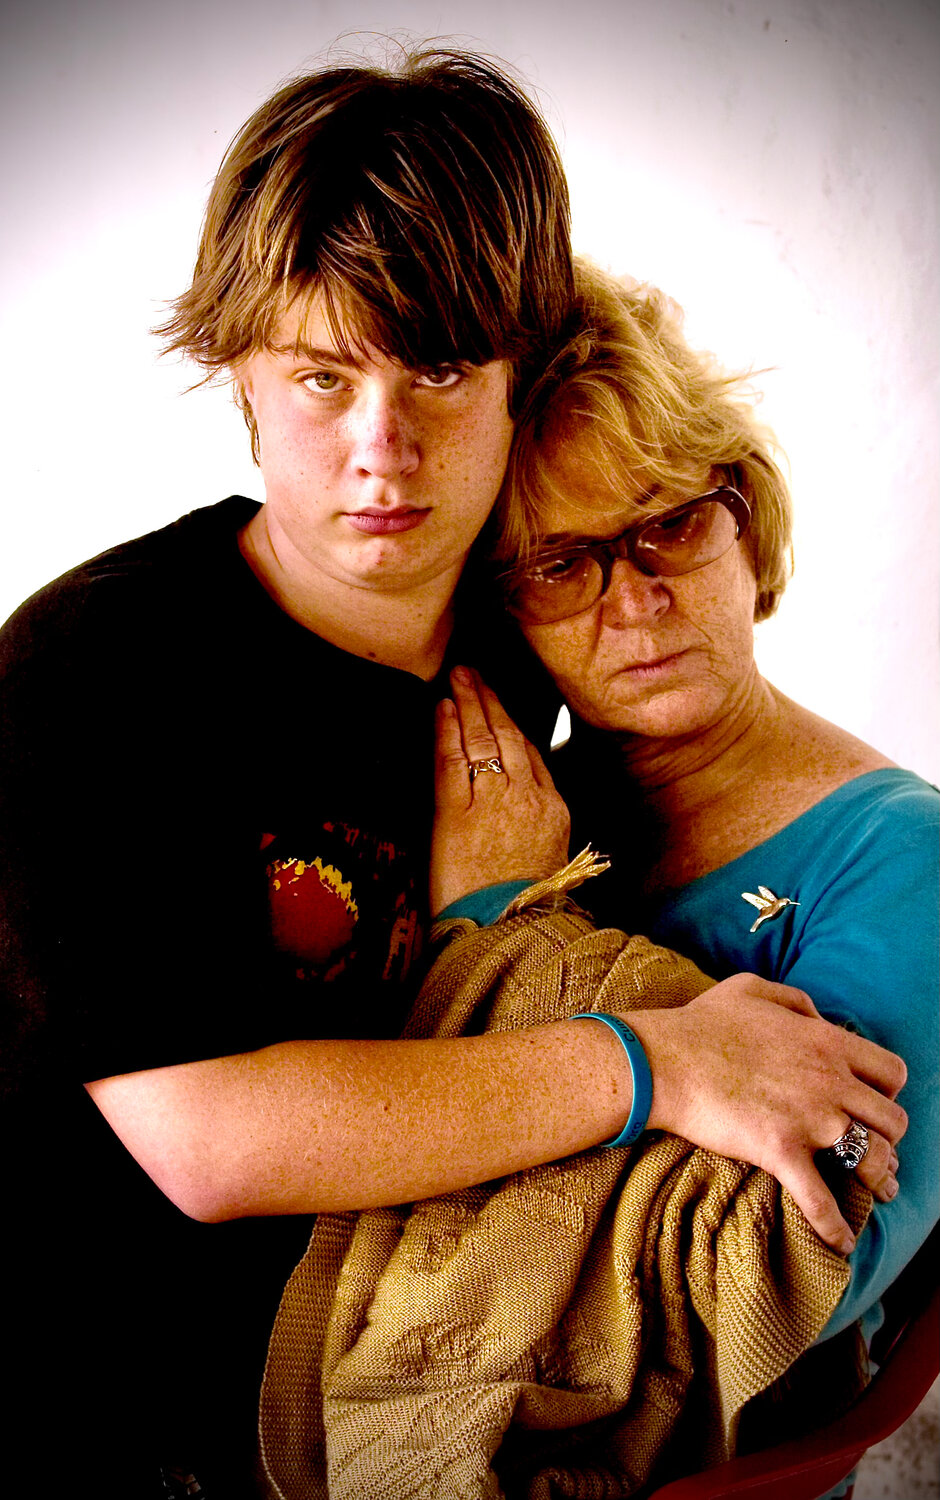 Spencer Shelton, with his mother, Mary Lee Bailey Shelton of Mesilla, has Fragile X Syndrome, a chromosomal disorder often associated with autism. On July 22, “La Equis” in Juarez, the giant X, will be illuminated in teal for Fragile X awareness.